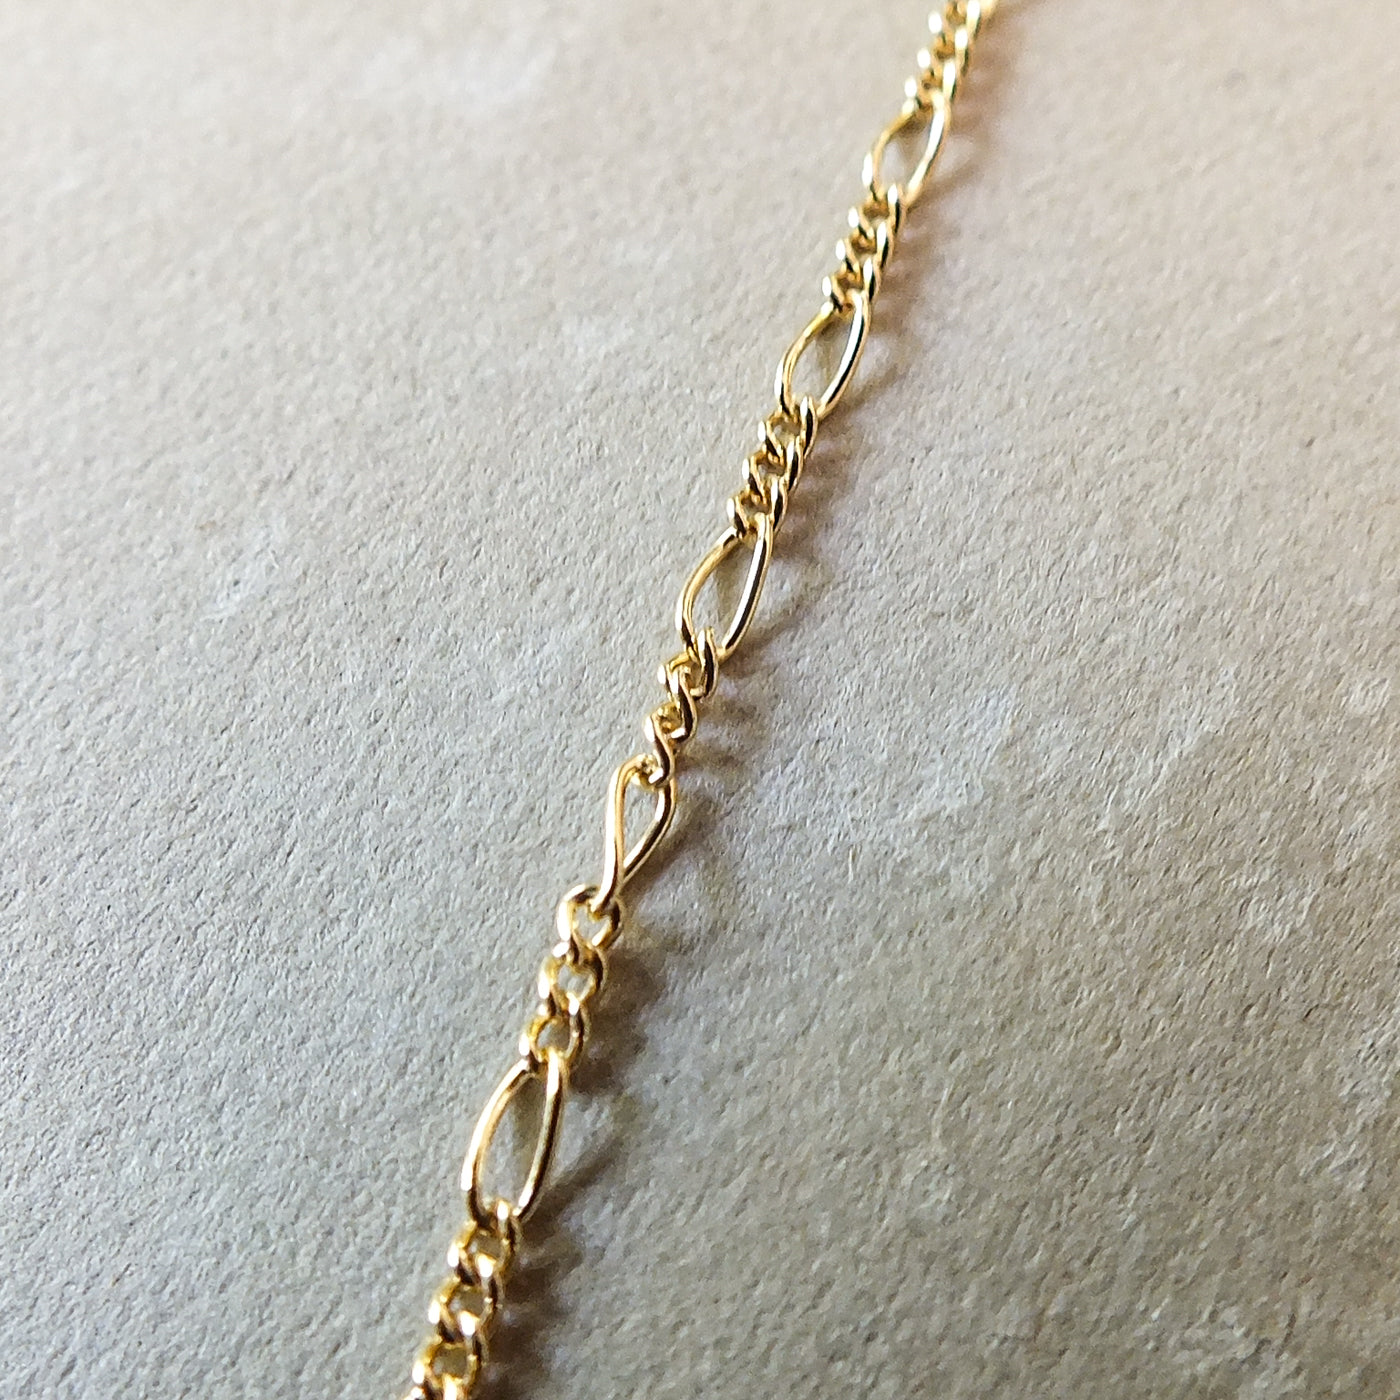 Gold filled Becoming Jewelry Figaro Chain Necklace on a textured surface.